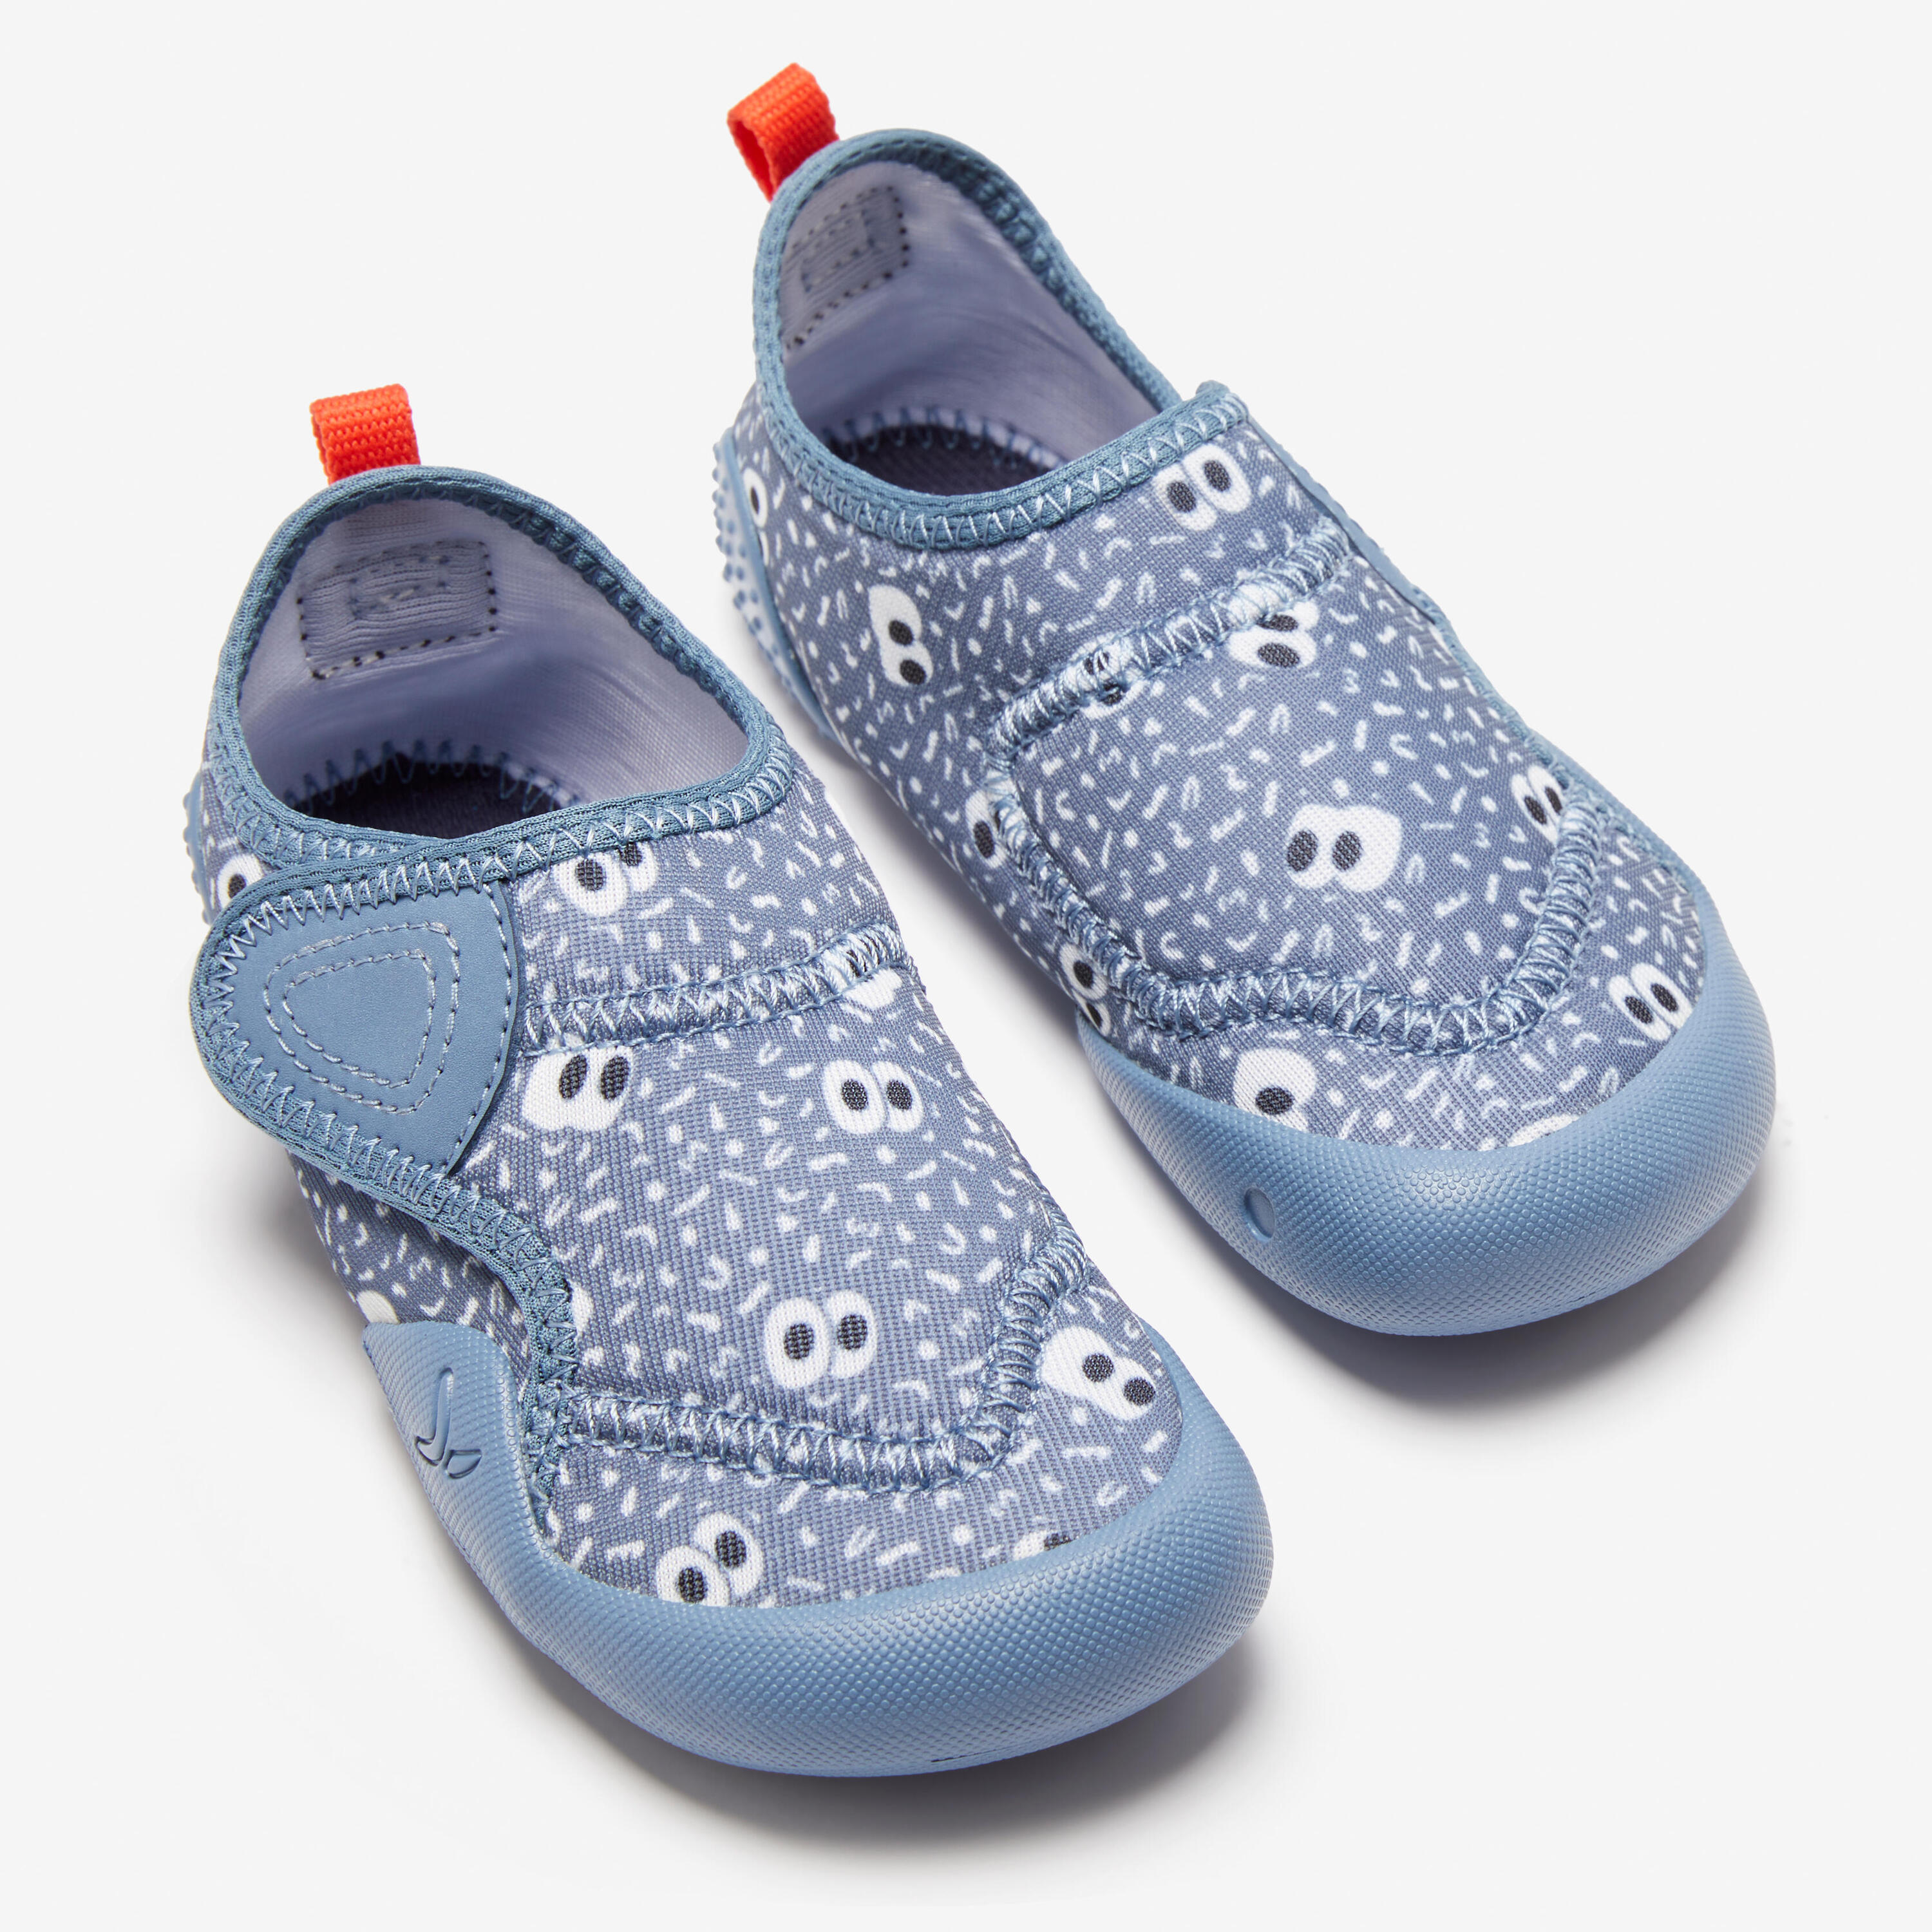 Kids' Non-Slip and Breathable Bootee - Patterns 2/8